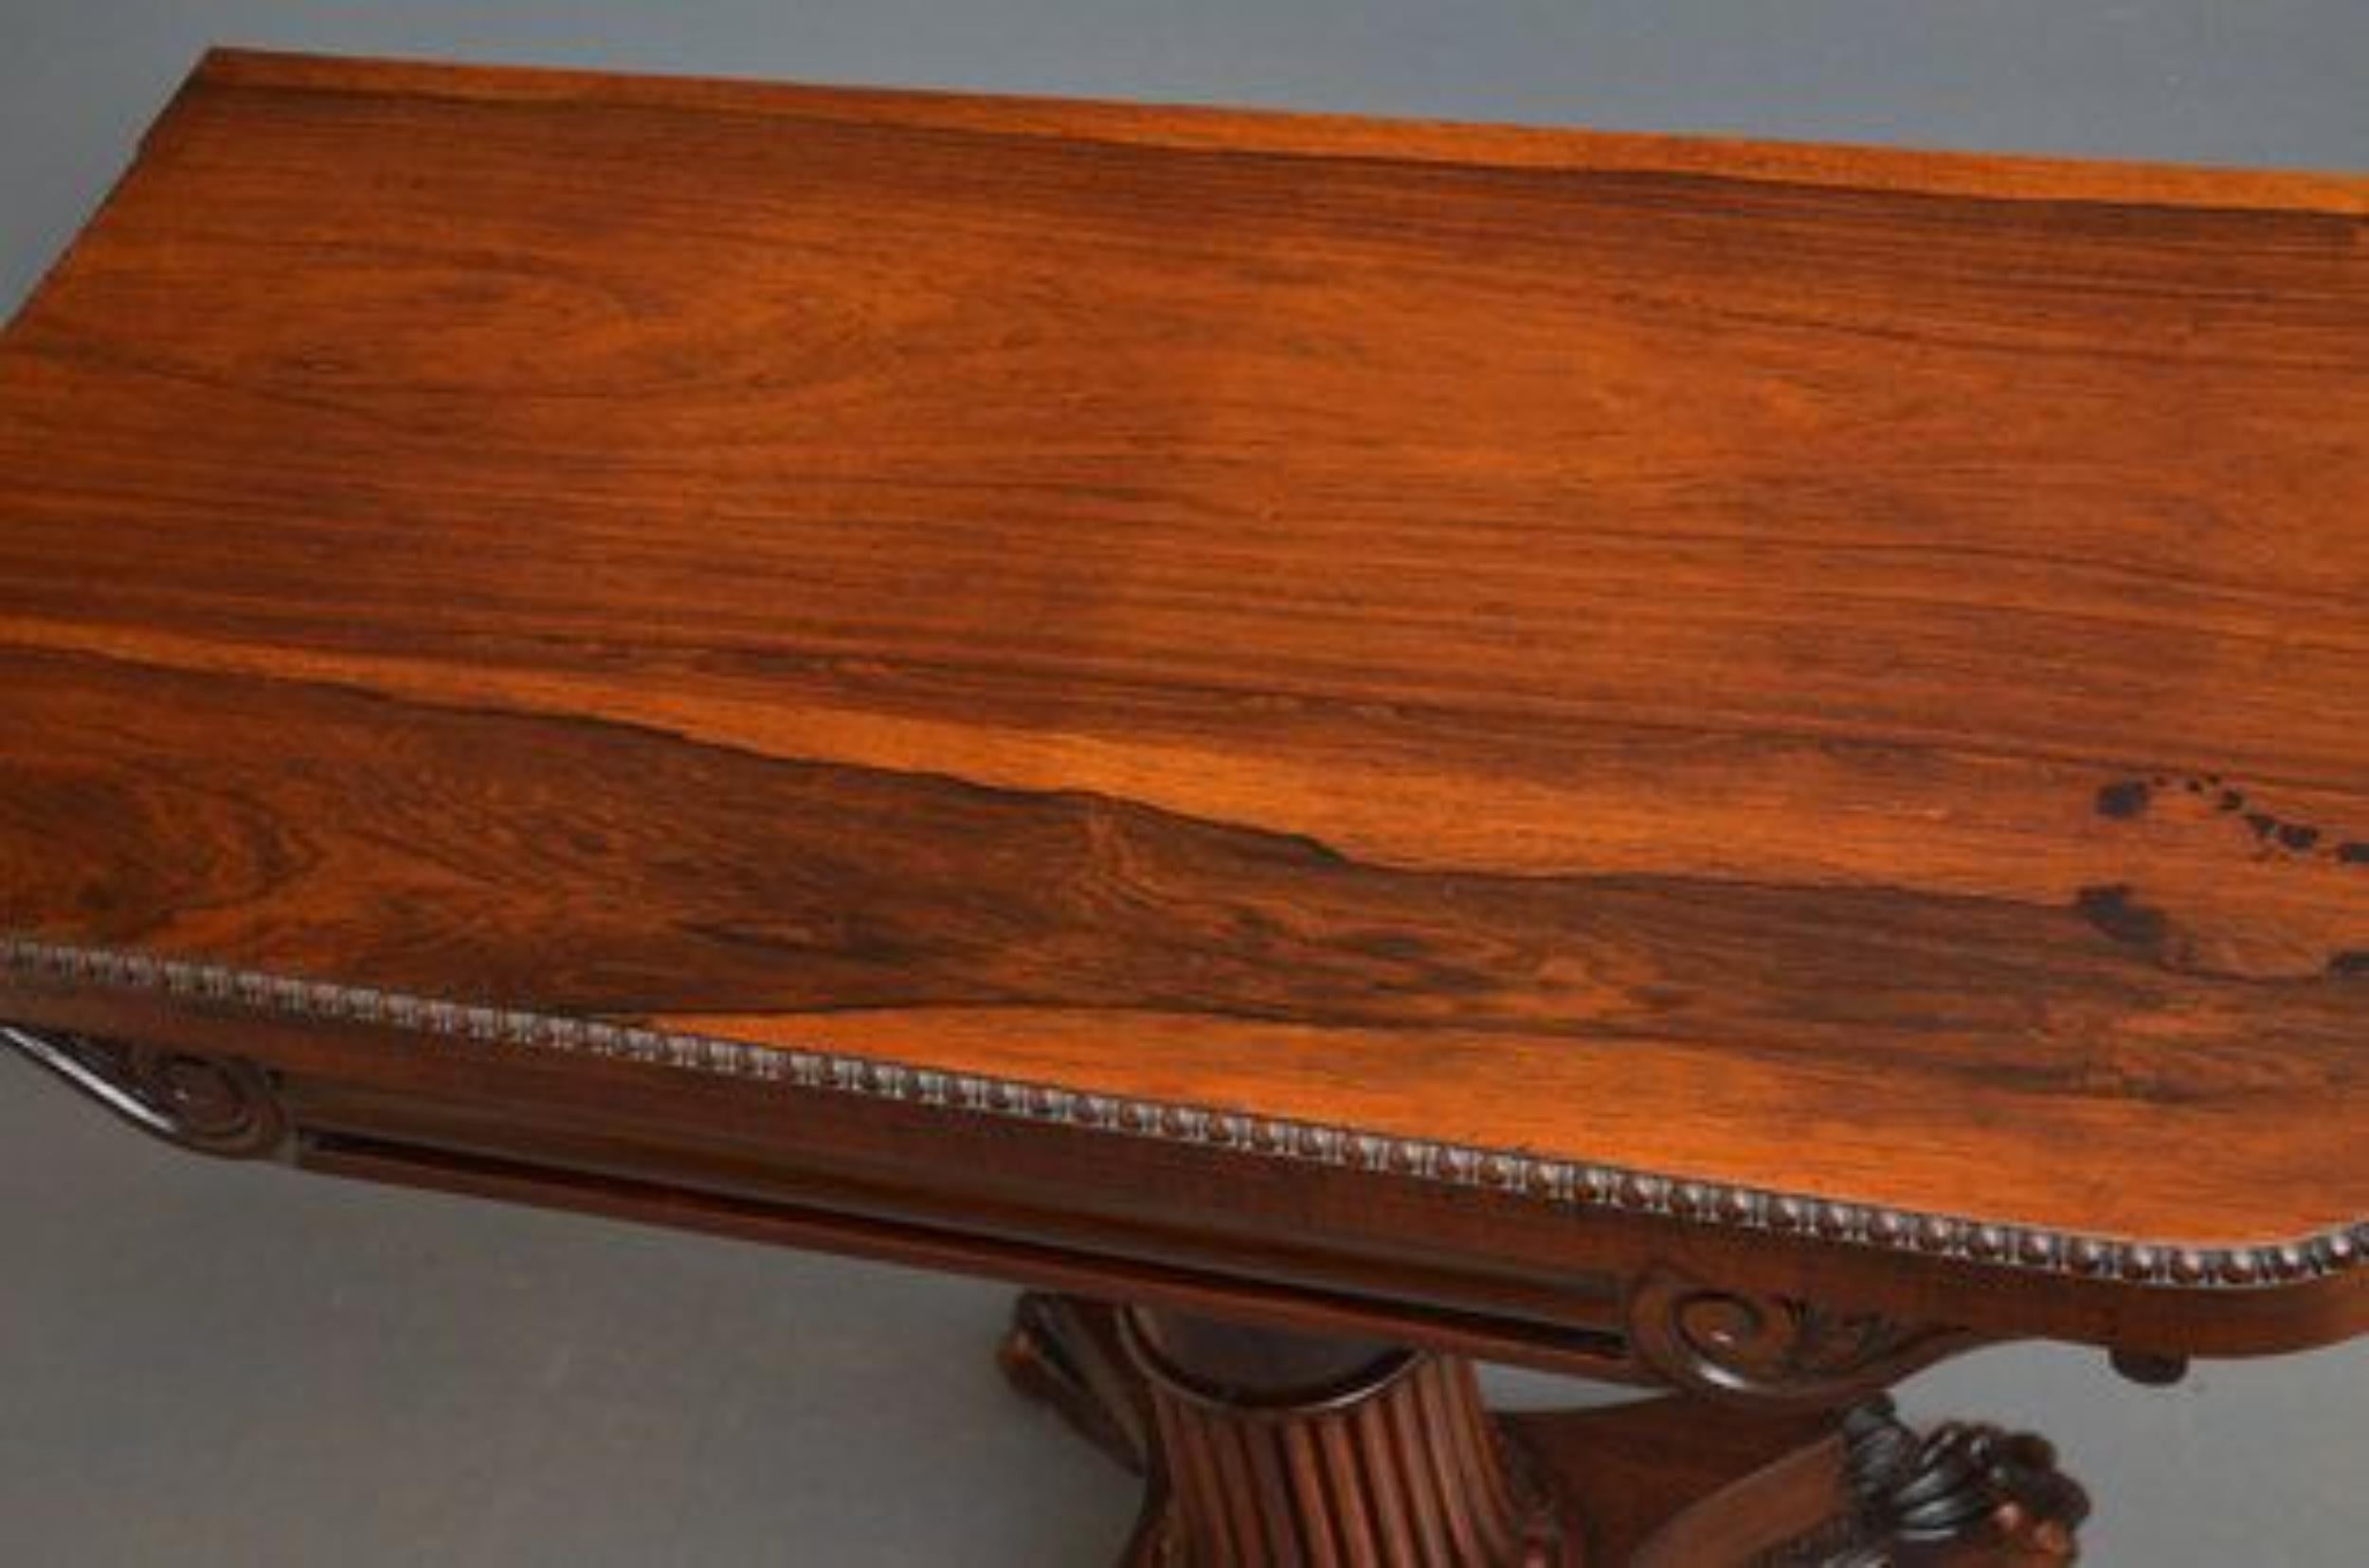 Sn017 Superior quality William IV, rosewood tea table, having stunning top with carved edge, cylindrical frieze flanked by carved leafy scrolls, standing on fluted column terminating in quatrefoil base, paw feet and castors. All in wonderful